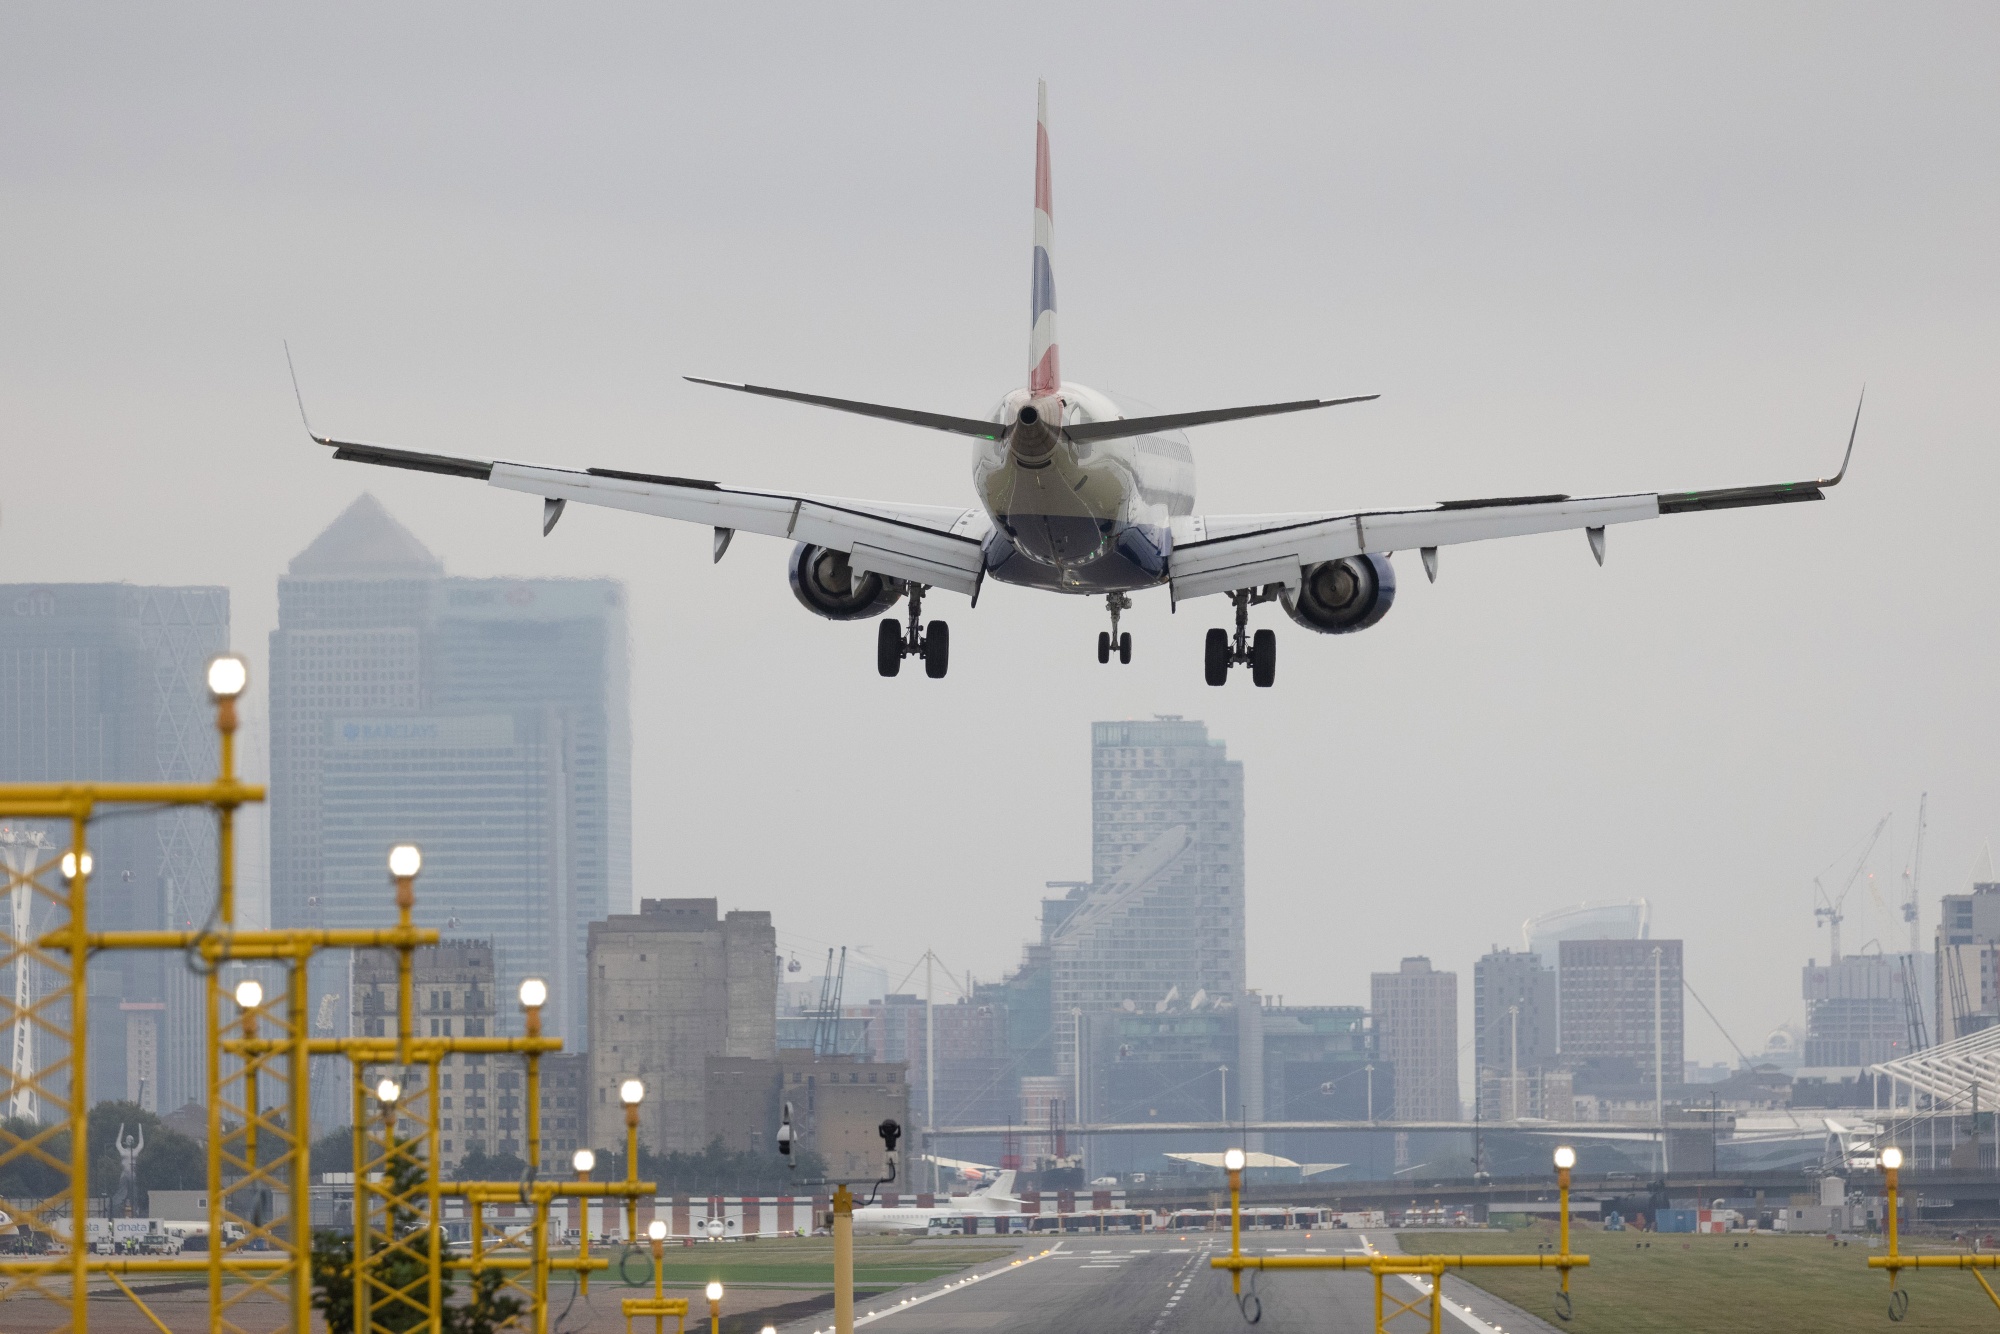 A passenger jet comes in to land&nbsp;at London City Airport.